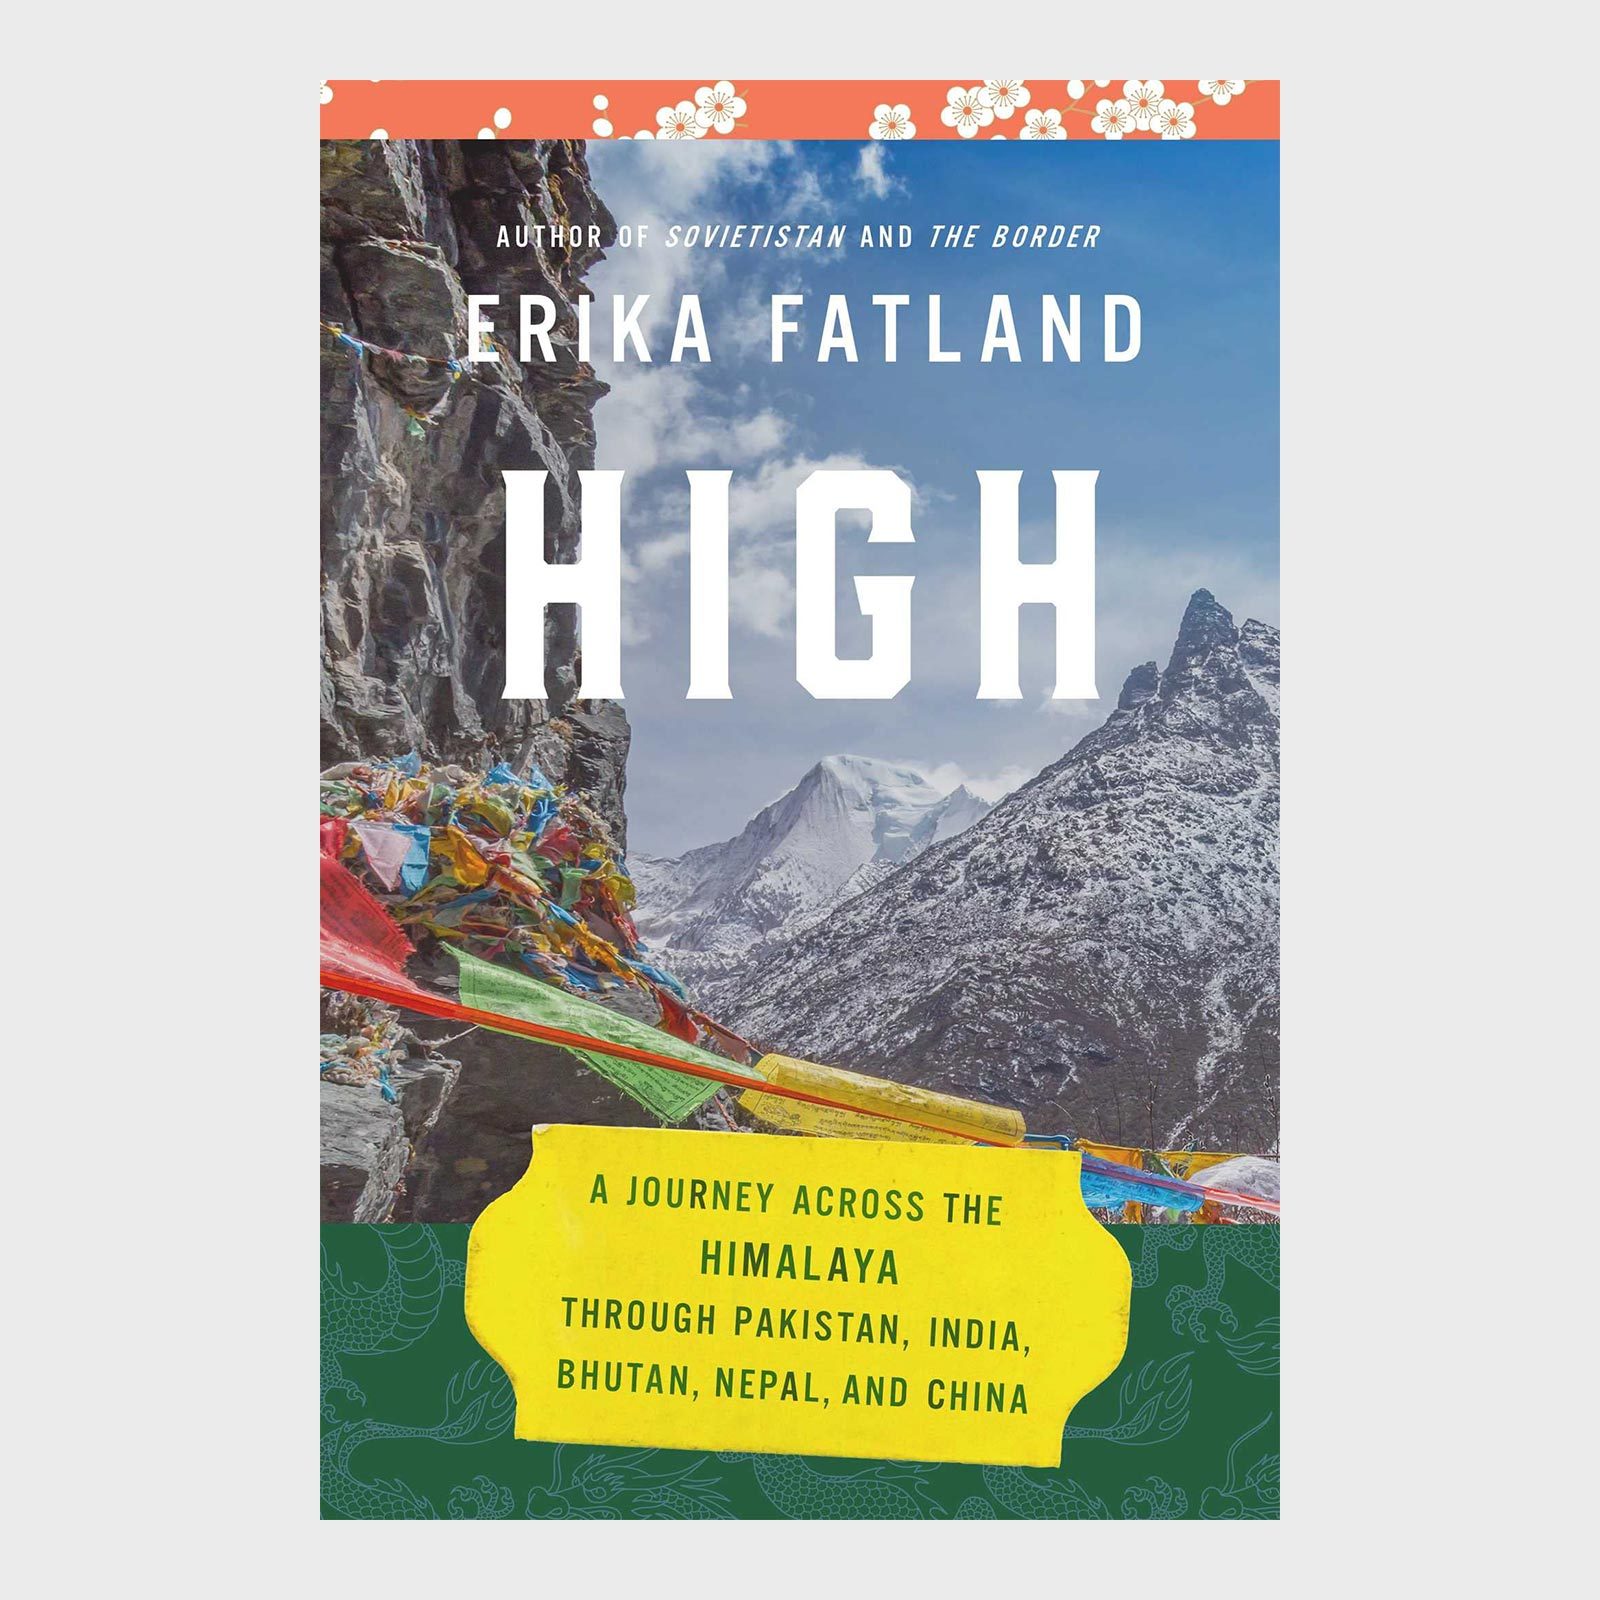 <h3><em>High</em> by Erika Fatland</h3> <p><strong>Setting:</strong> The Himalayas (Pakistan, India, Bhutan, Nepal and China)</p> <p>Not everyone is up for remote lands with peaks and plateaus at dizzyingly high altitudes. Thanks to Erika Fatland's <em><a href="https://www.amazon.com/High-Journey-Himalaya-Through-Pakistan/dp/163936336X" rel="noopener noreferrer">High</a></em>, your mind can go where your body doesn't. Her well-researched and recorded travels through the Himalayas unveil a patchwork of subcultures, languages and religions. This travel book is a virtual getaway to cloud-piercing towns shrouded in thin, cold air and intriguing encounters with Islam, Buddhism, Hinduism and shamanic faiths—all part and parcel of the lives of the Himalayan highlanders.</p> <p class="listicle-page__cta-button-shop"><a class="shop-btn" href="https://www.amazon.com/High-Journey-Himalaya-Through-Pakistan/dp/163936336X">Shop Now</a></p>